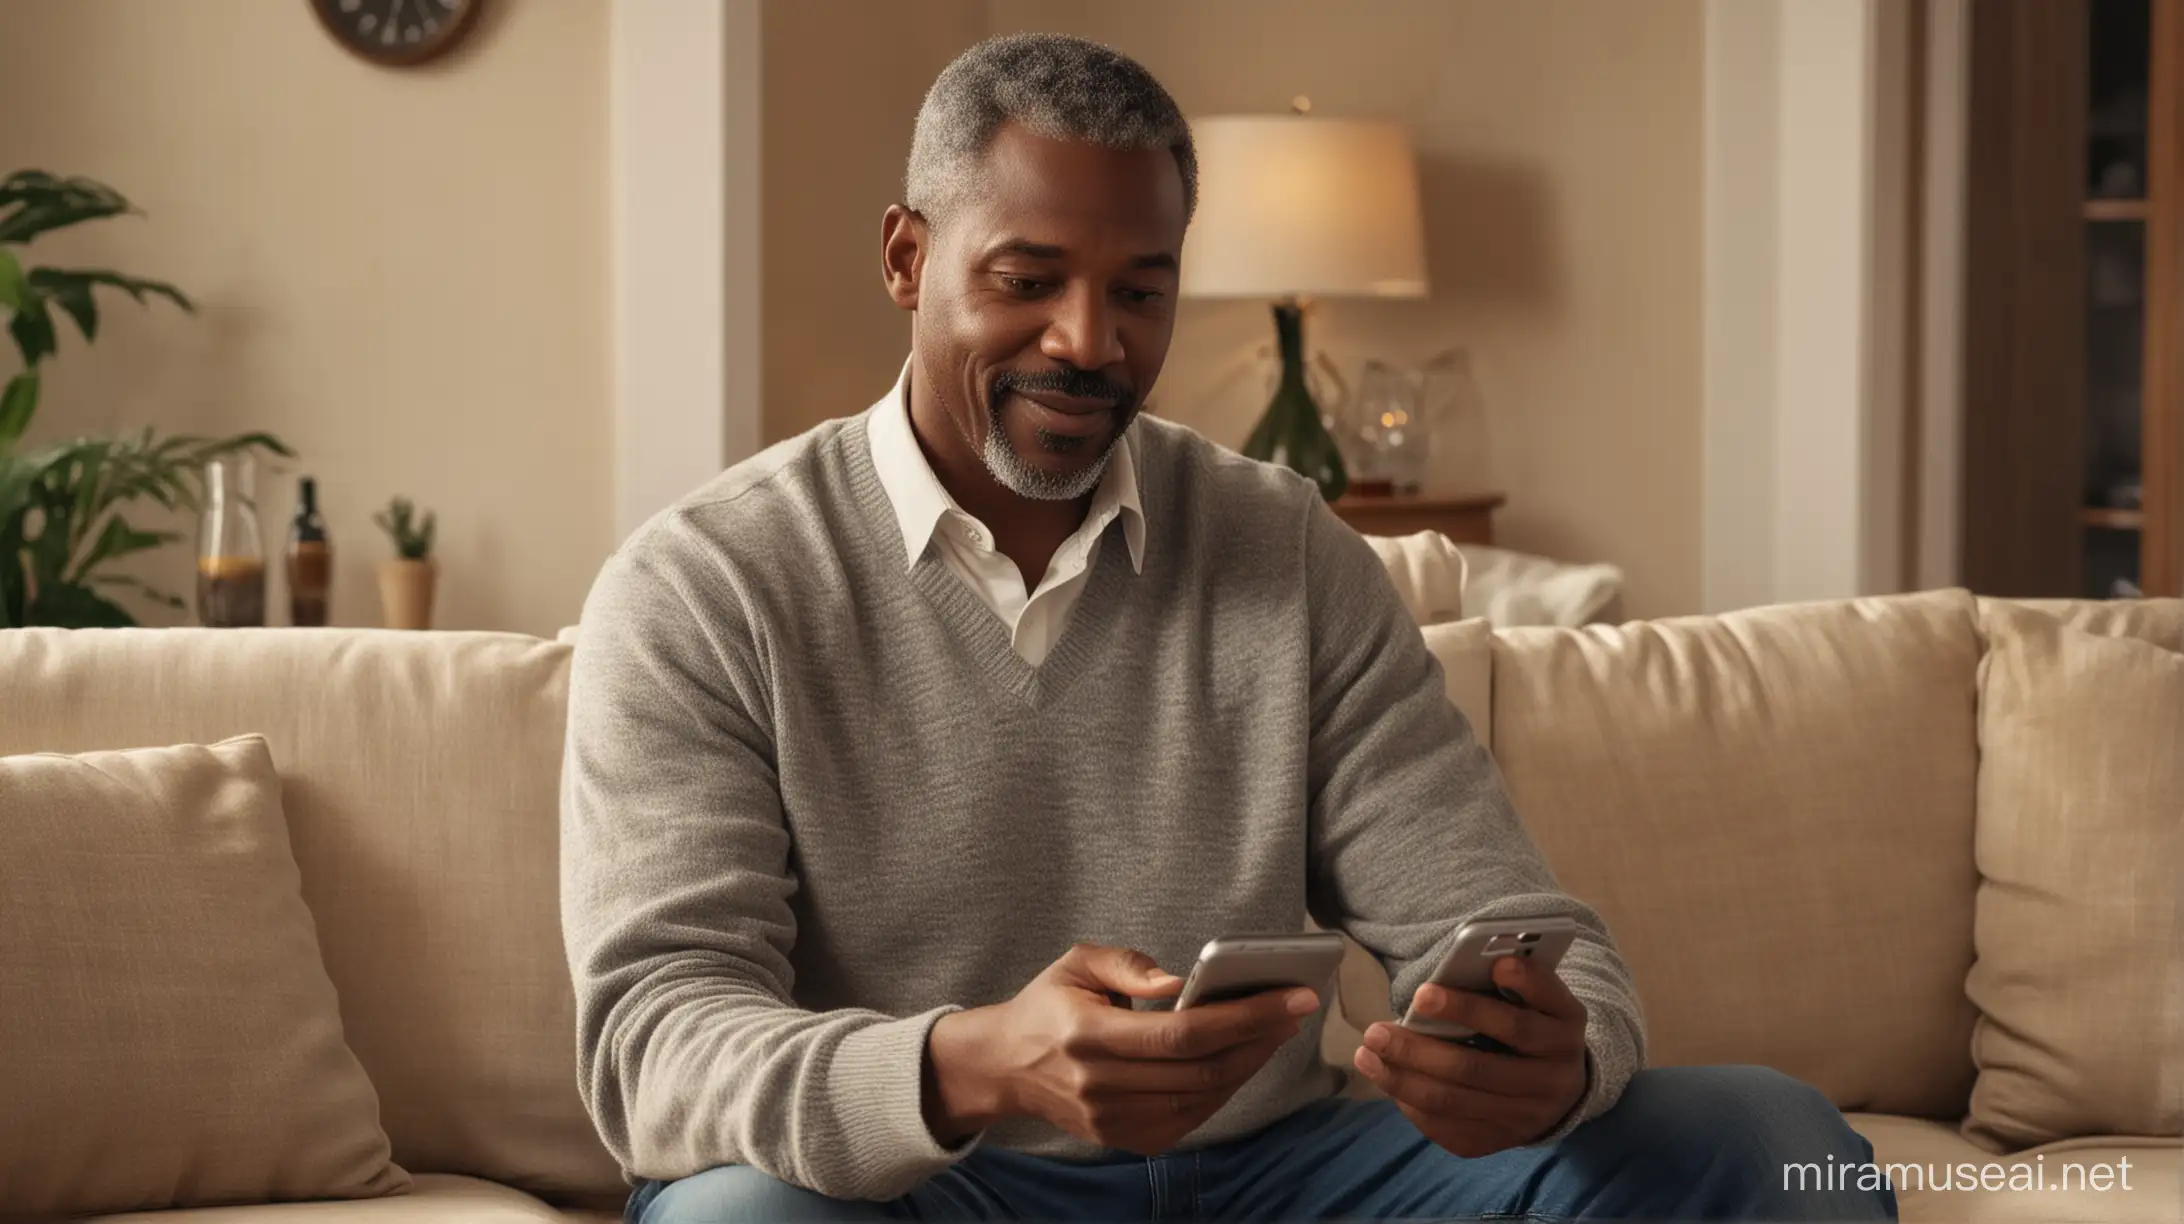 Mature Black Man Engaging with Online News and Messaging in Cozy Home Setting